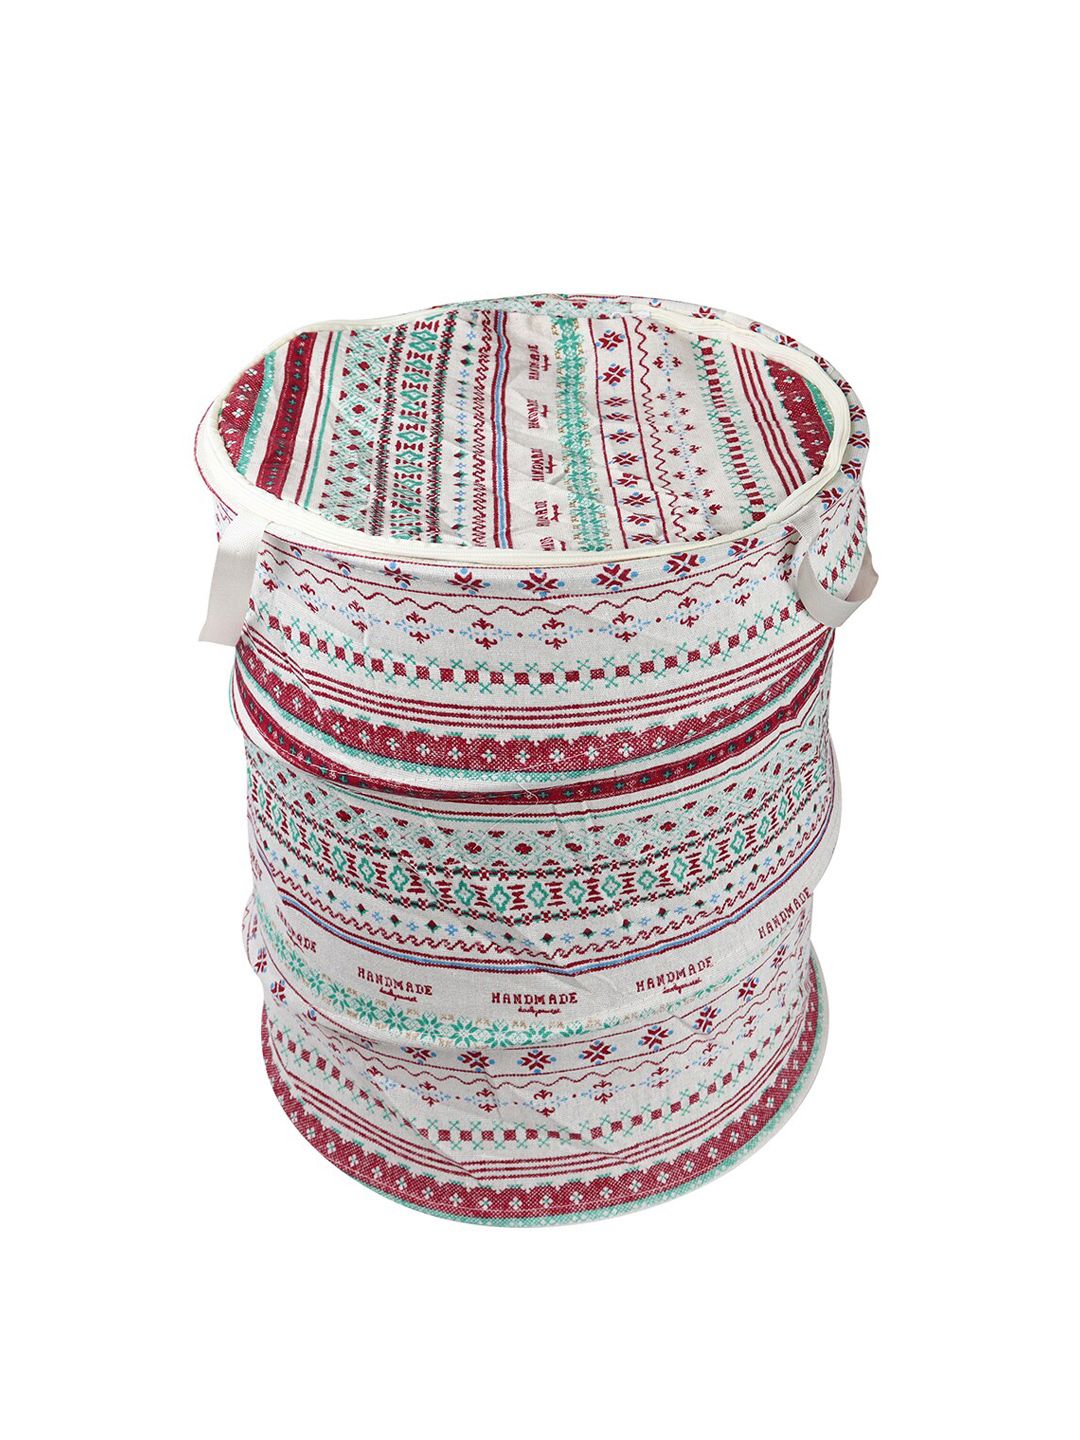 OddCroft White & Red Printed Foldable Laundry Basket Price in India